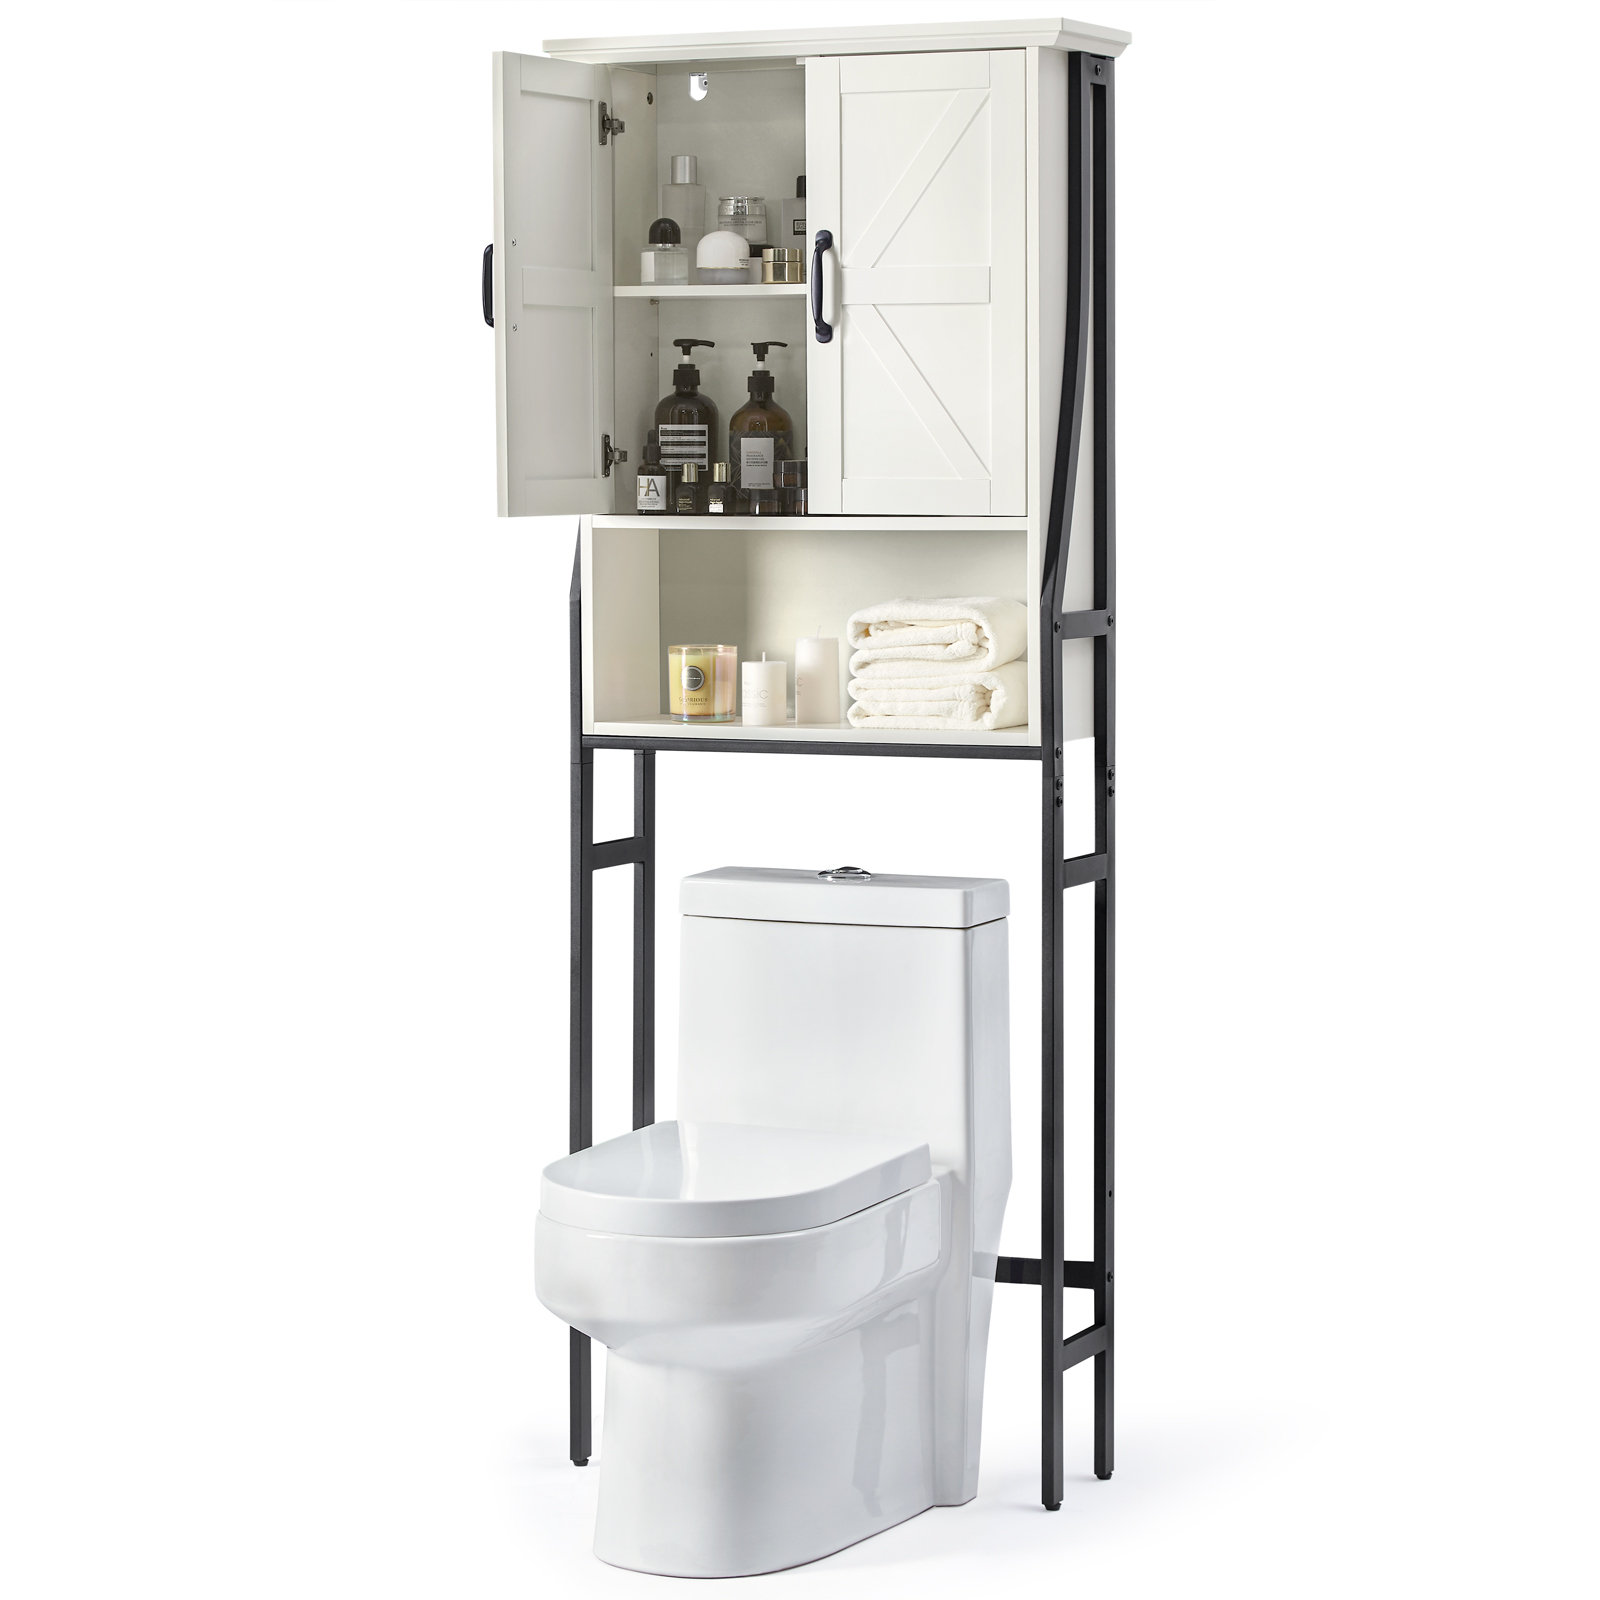 Trijal Metal & MDF Wood Over-the-Toilet Storage, Over Toilet Storage Cabinet with Barn Doors Gracie Oaks Finish: White